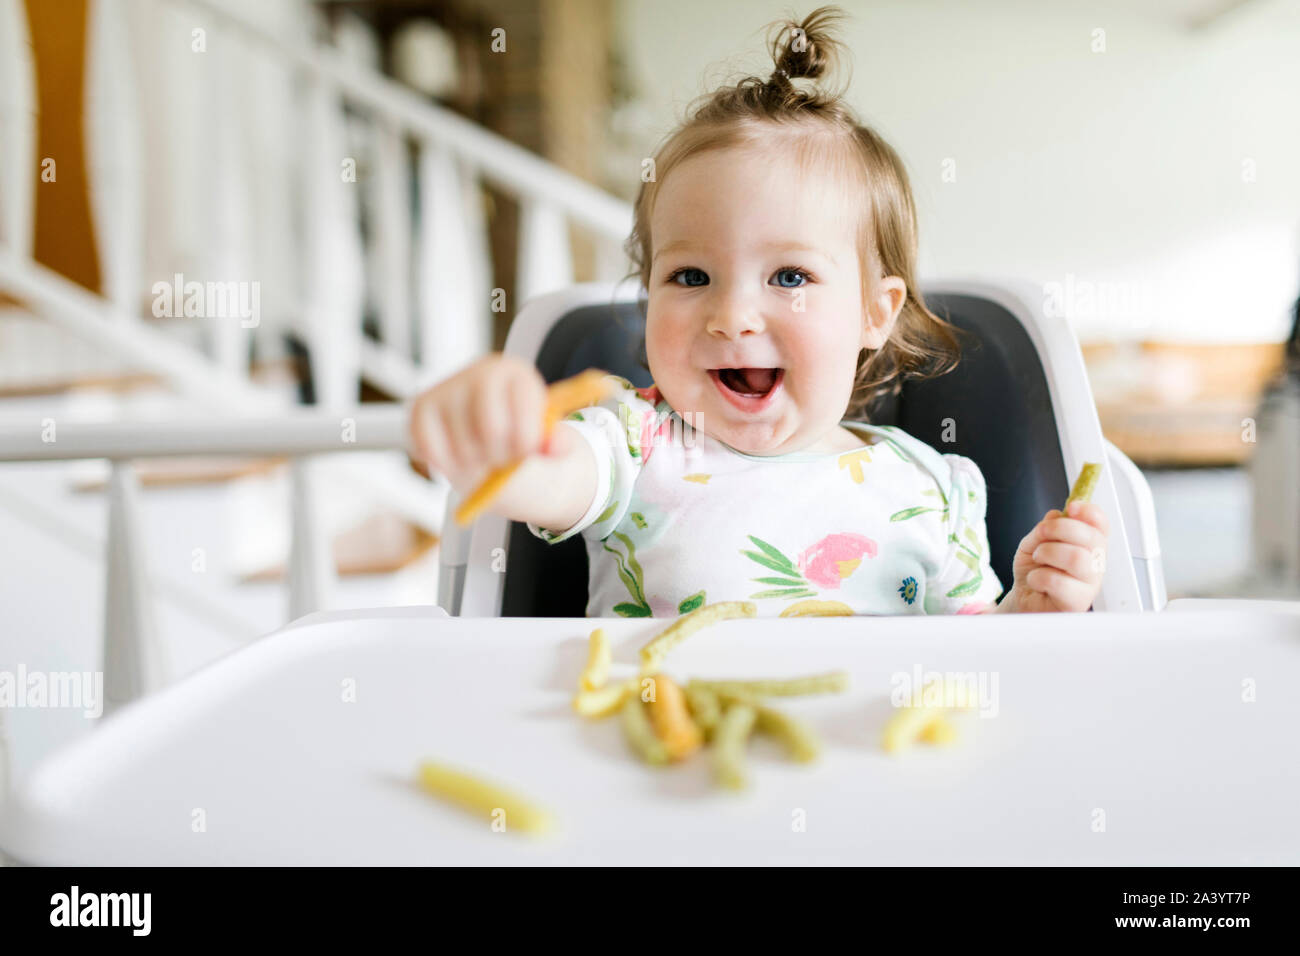 Baby girl eating in high chair Stock Photo